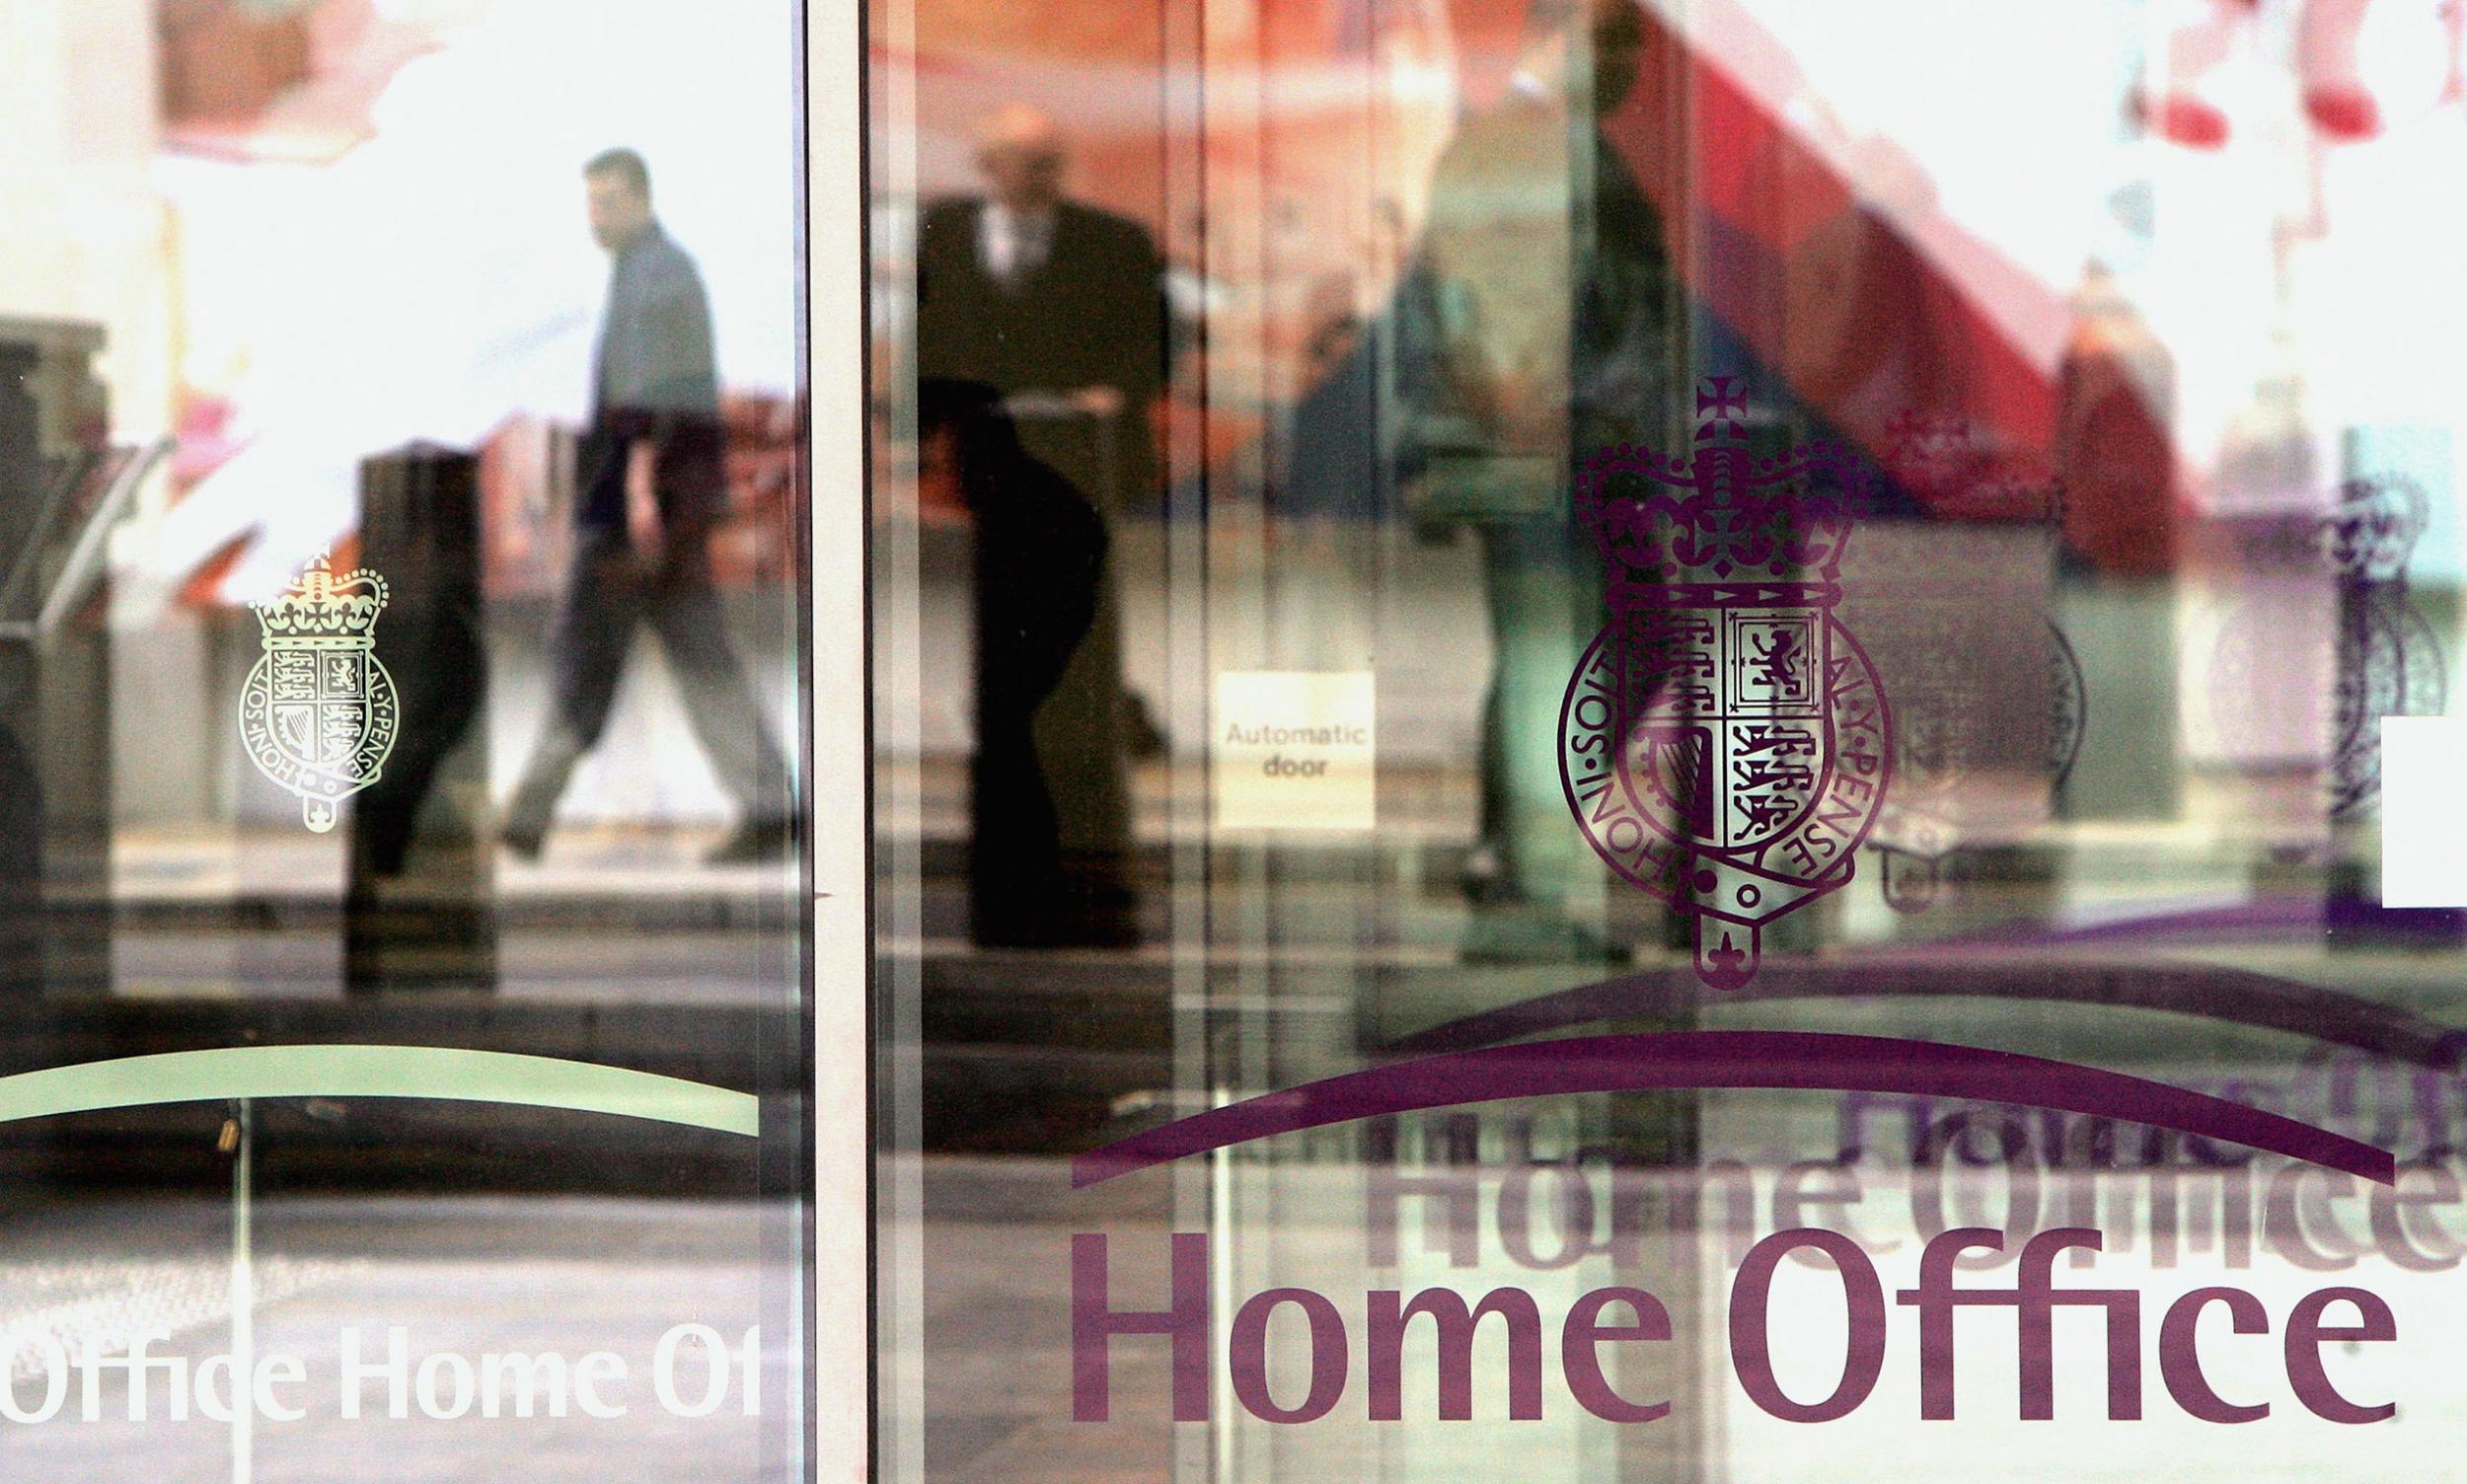 Home Office rules on immigration for the spouses of British citizens are splitting up families